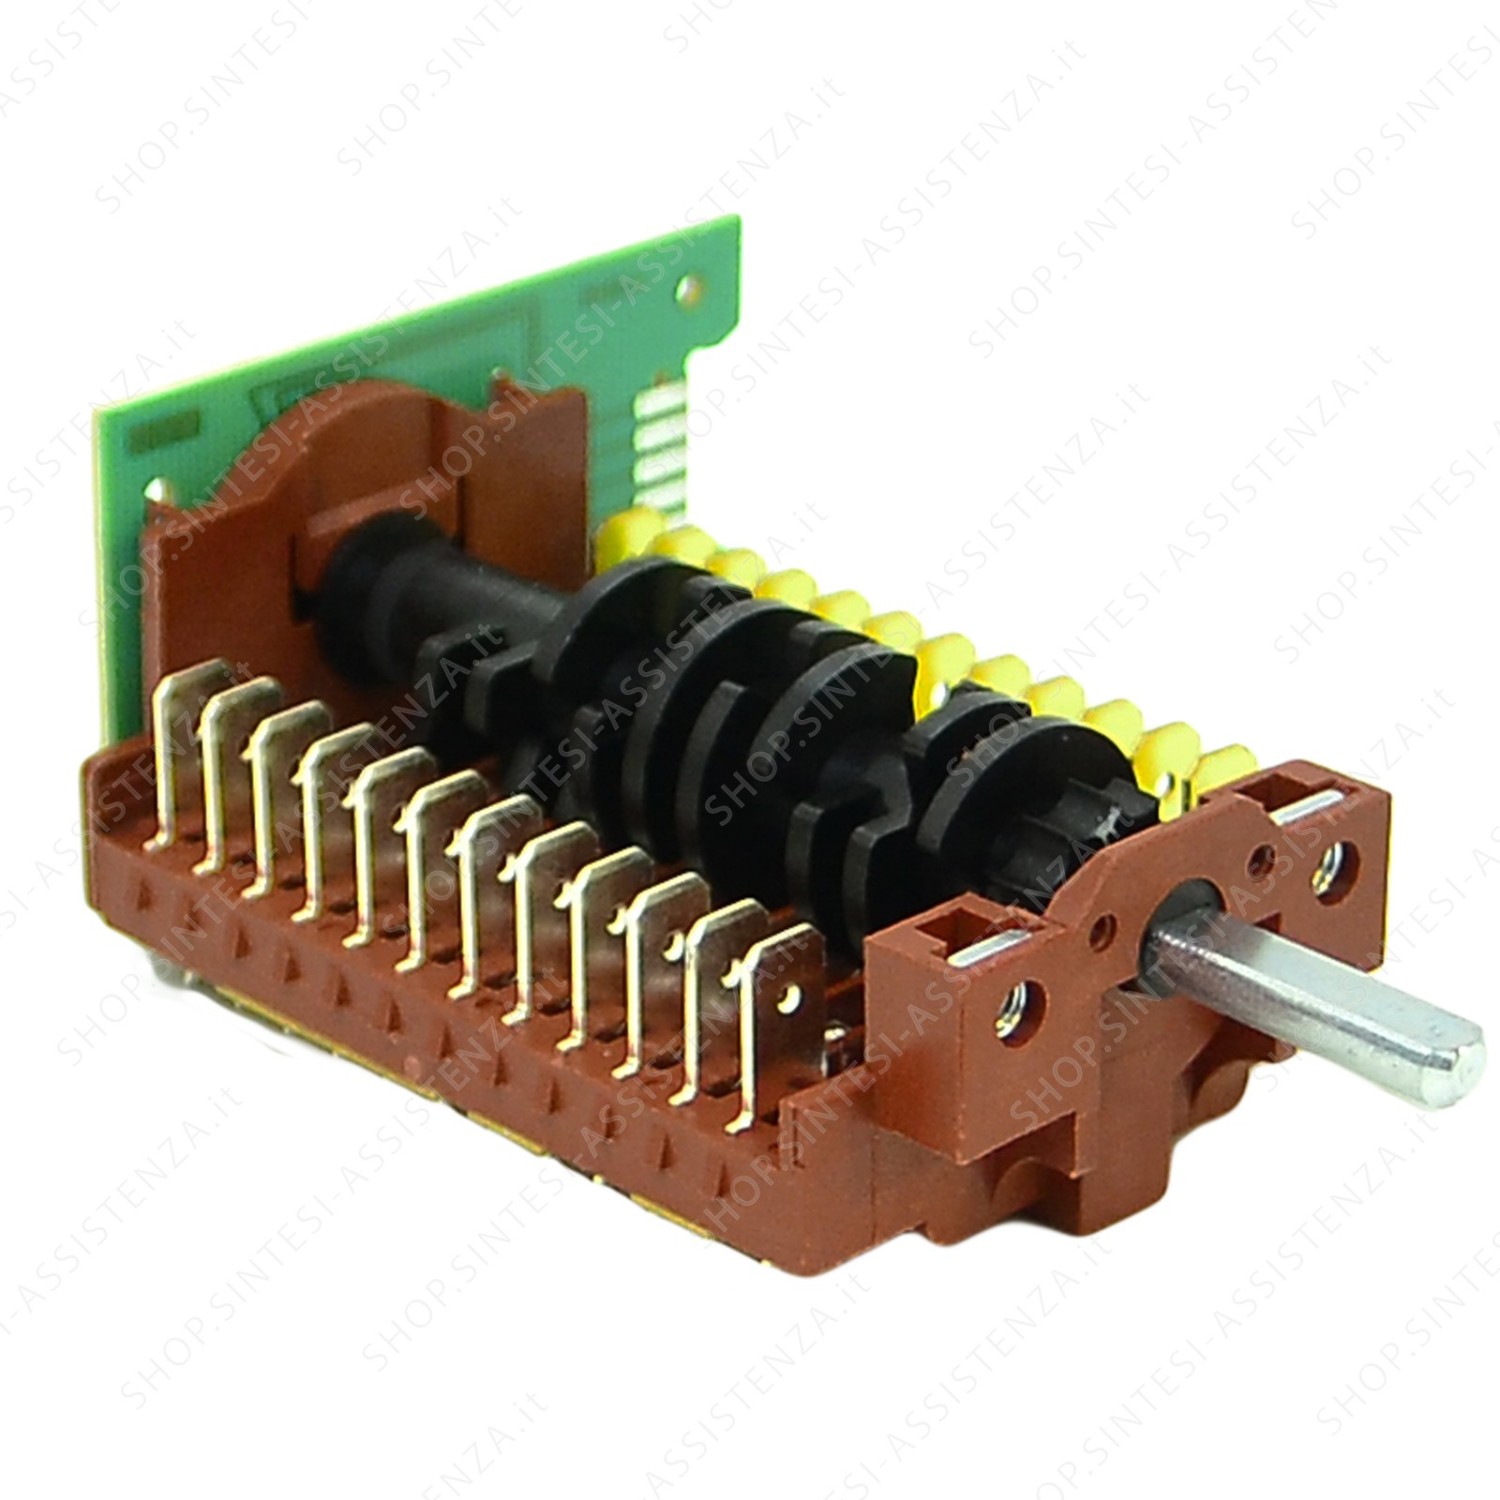 PROGRAM SWITCH FOR FRANKE OVEN 11 POSITIONS WITH ENCODER - 133.0170.567